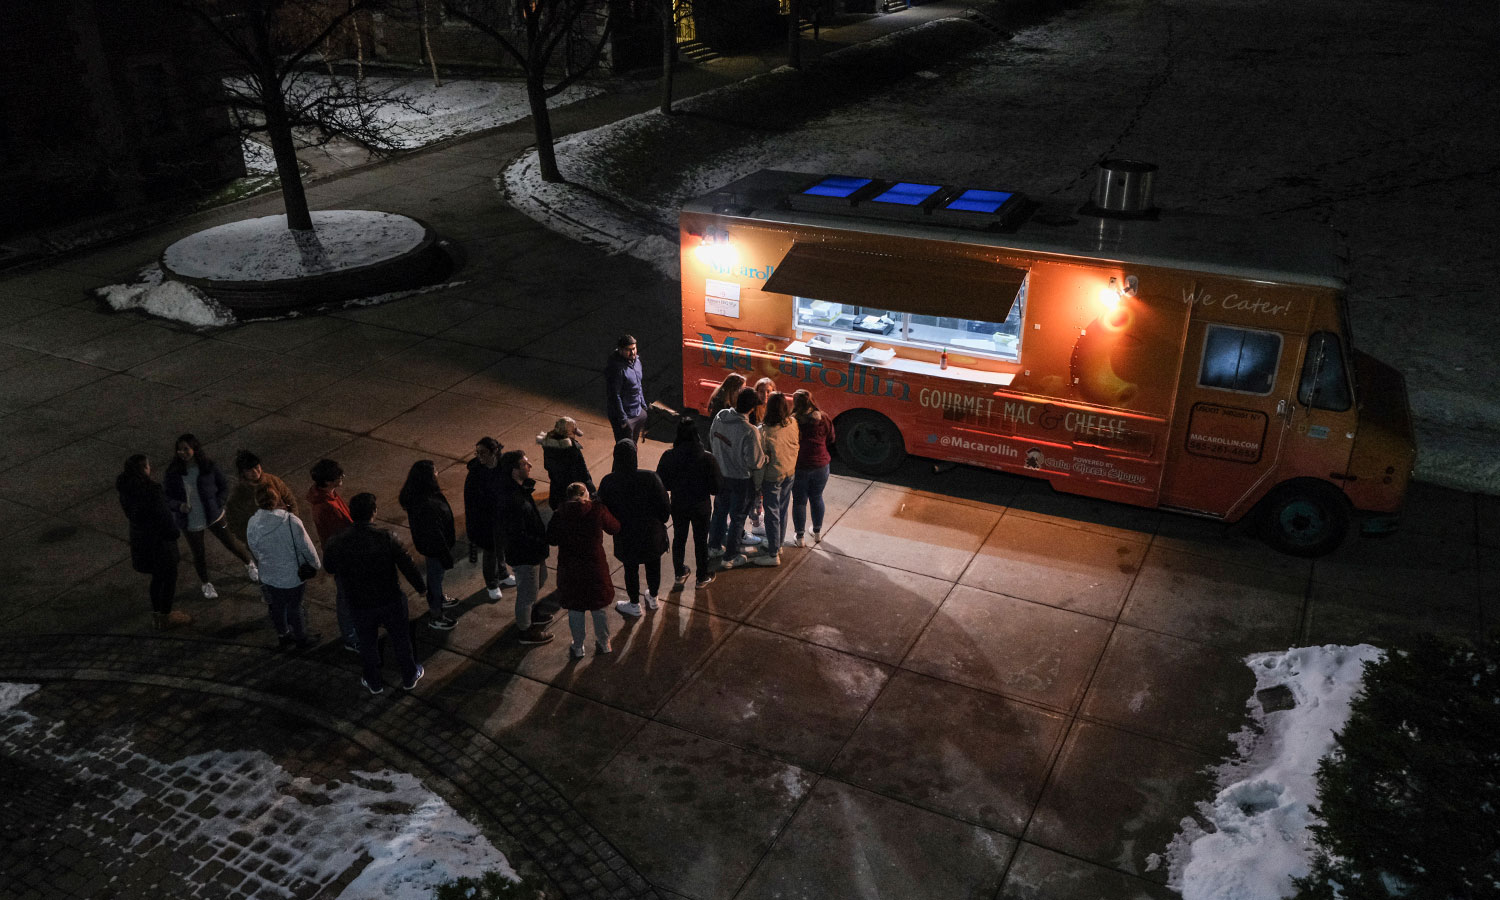 Food Truck on Campus at Night